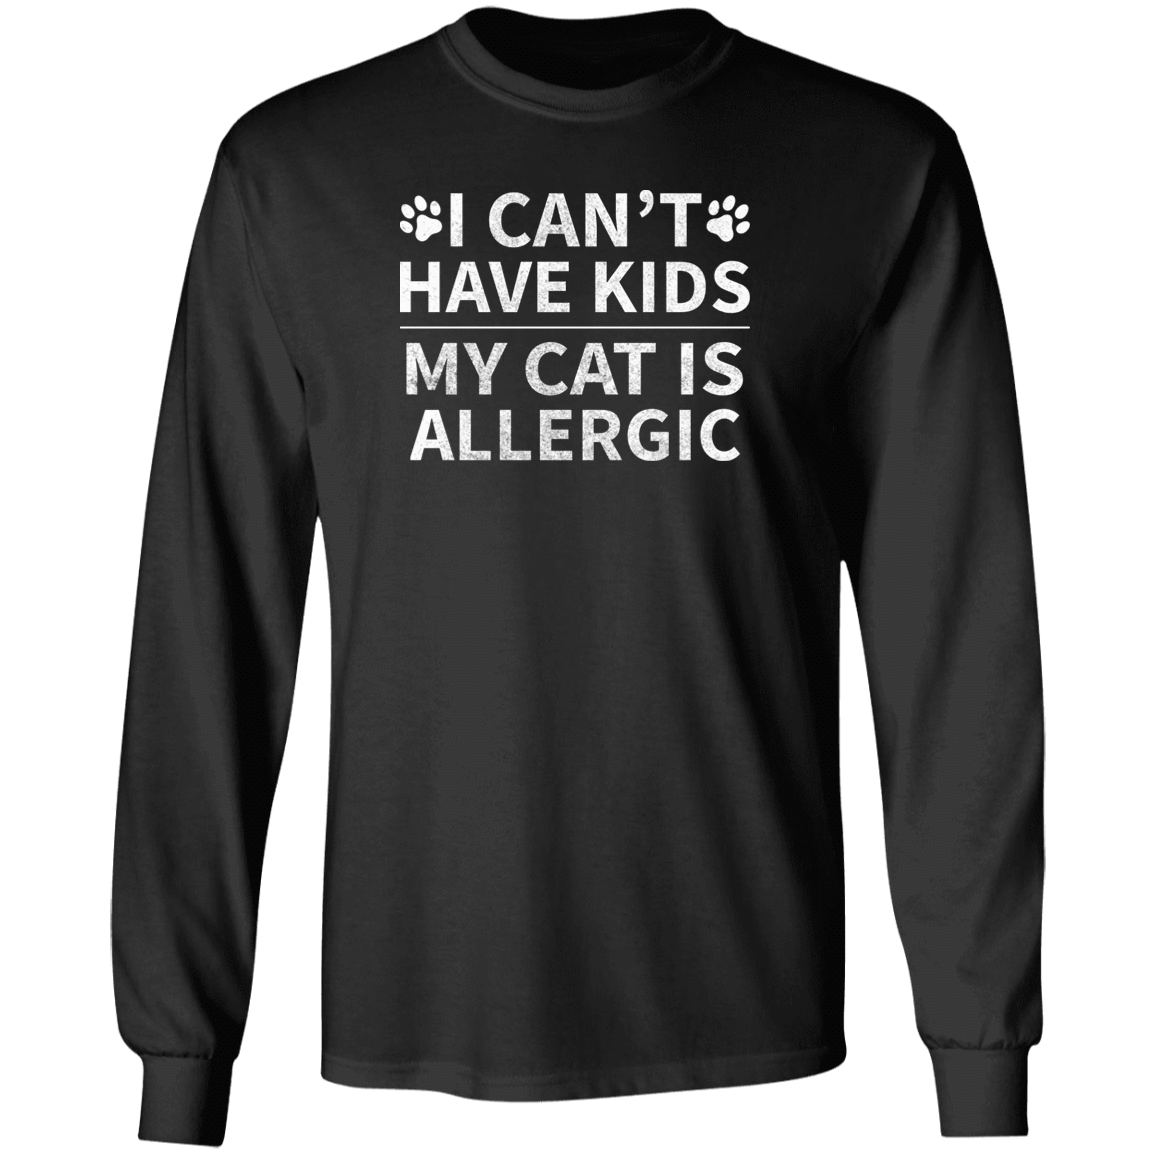 My Cat Is Allergic - Long Sleeve T Shirt.